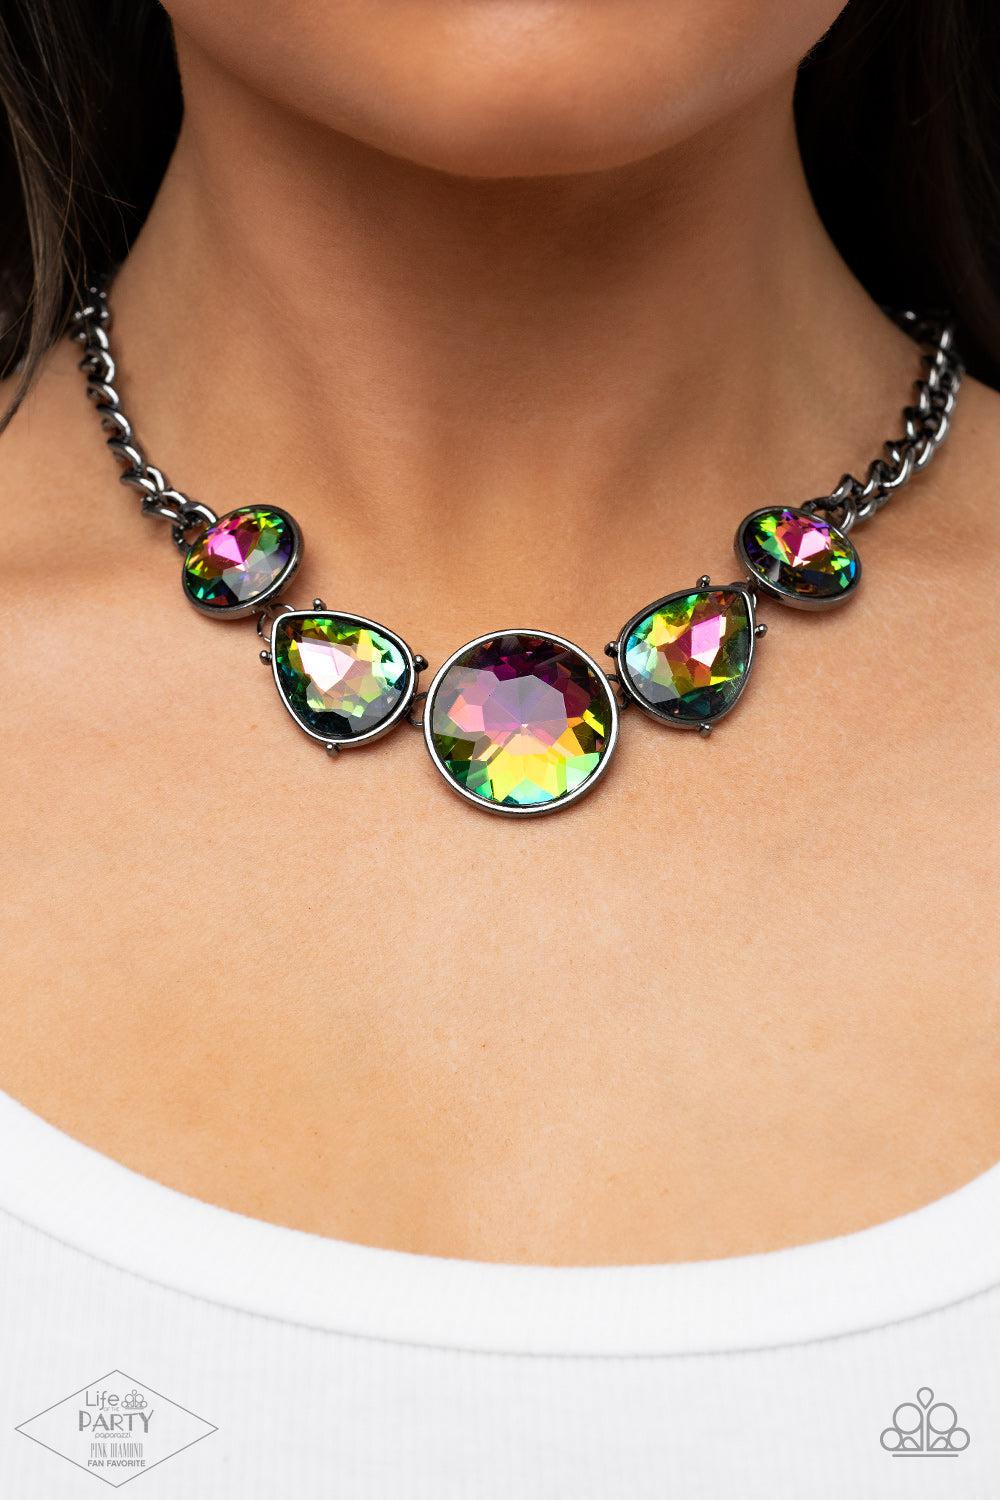 All The Worlds My Stage Multi Oil Spill Rhinestone Necklace - Paparazzi Accessories-on model - CarasShop.com - $5 Jewelry by Cara Jewels